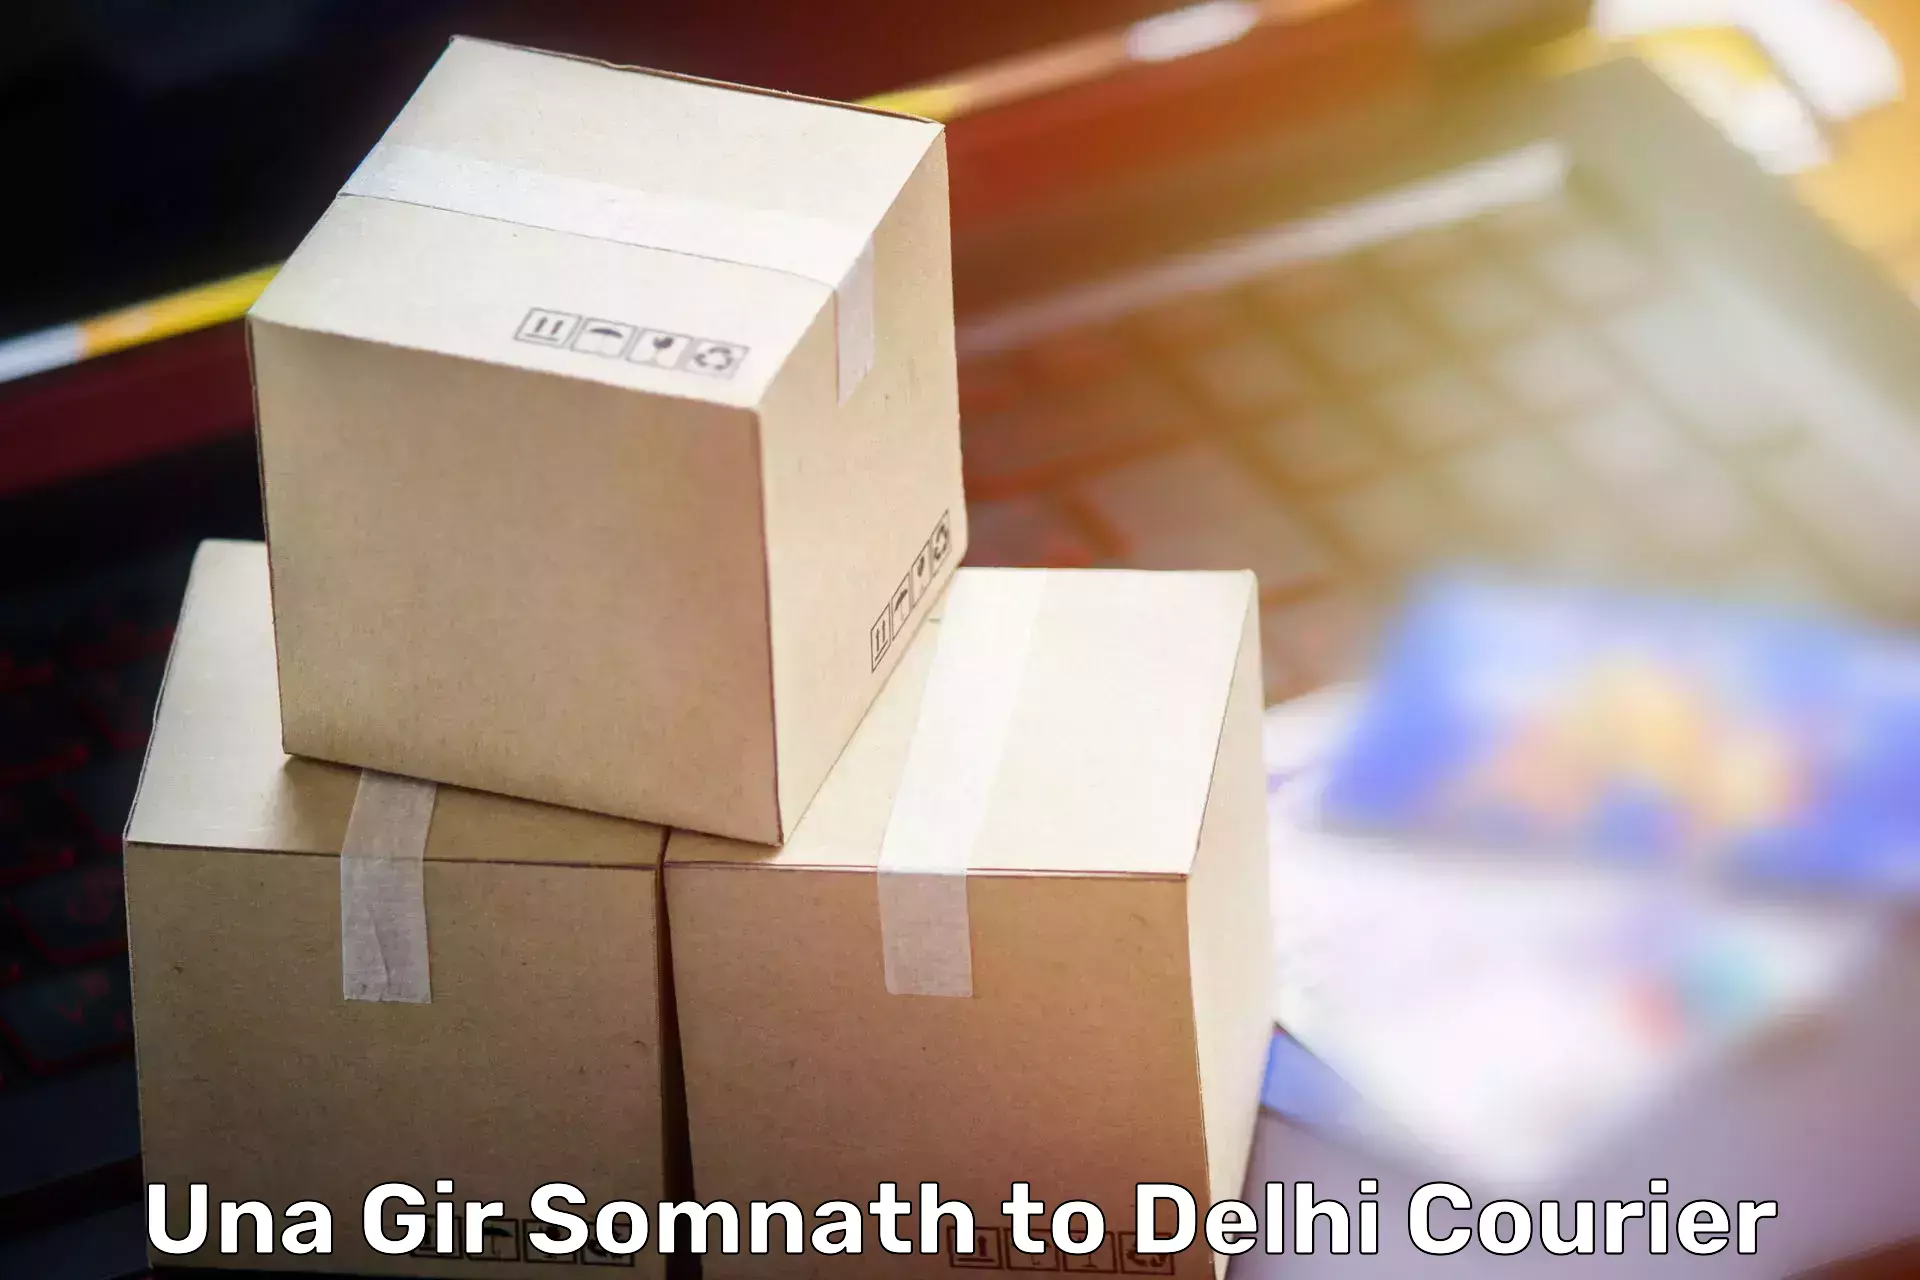 Moving and packing experts Una Gir Somnath to Delhi